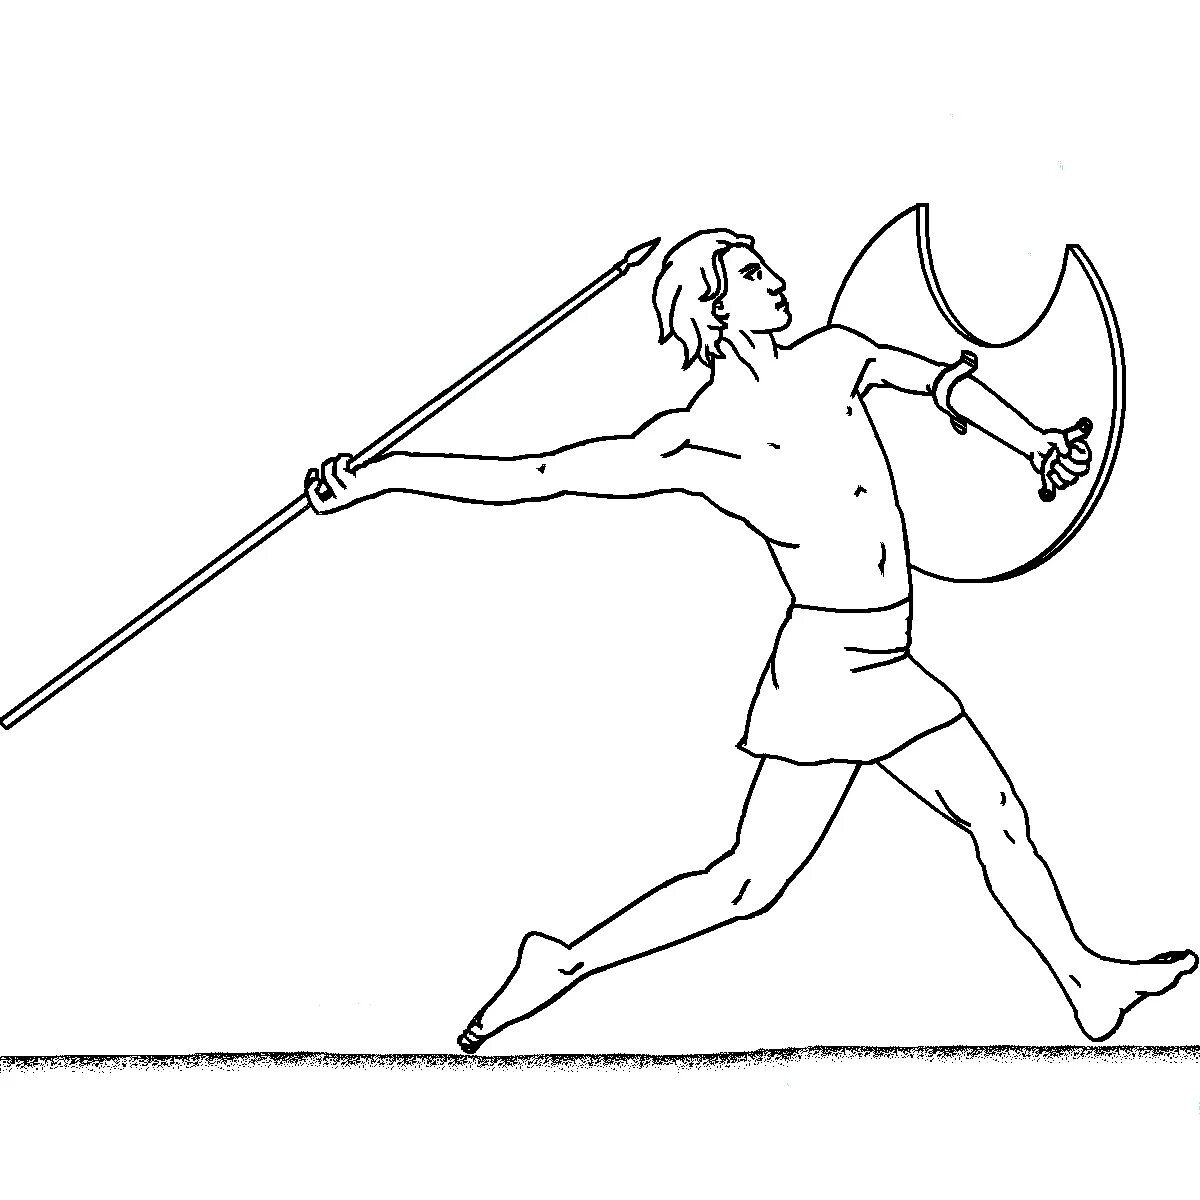 Olympic games in ancient greece #10